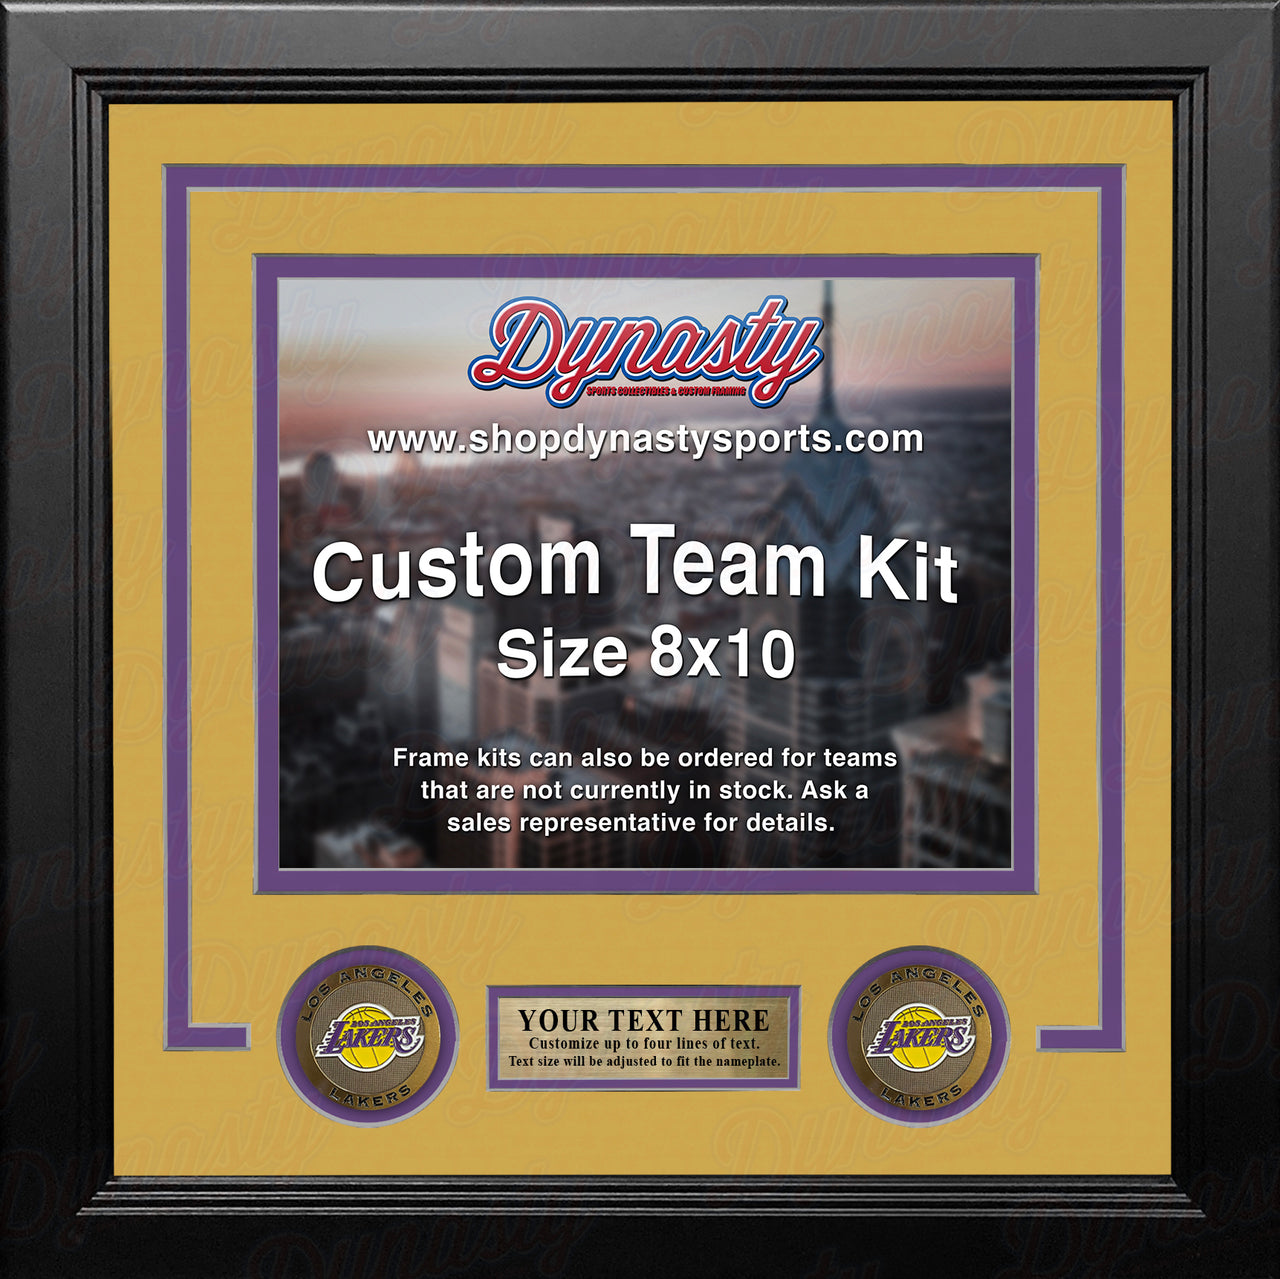 Los Angeles Lakers Custom NBA Basketball 8x10 Picture Frame Kit (Lakers Gold)